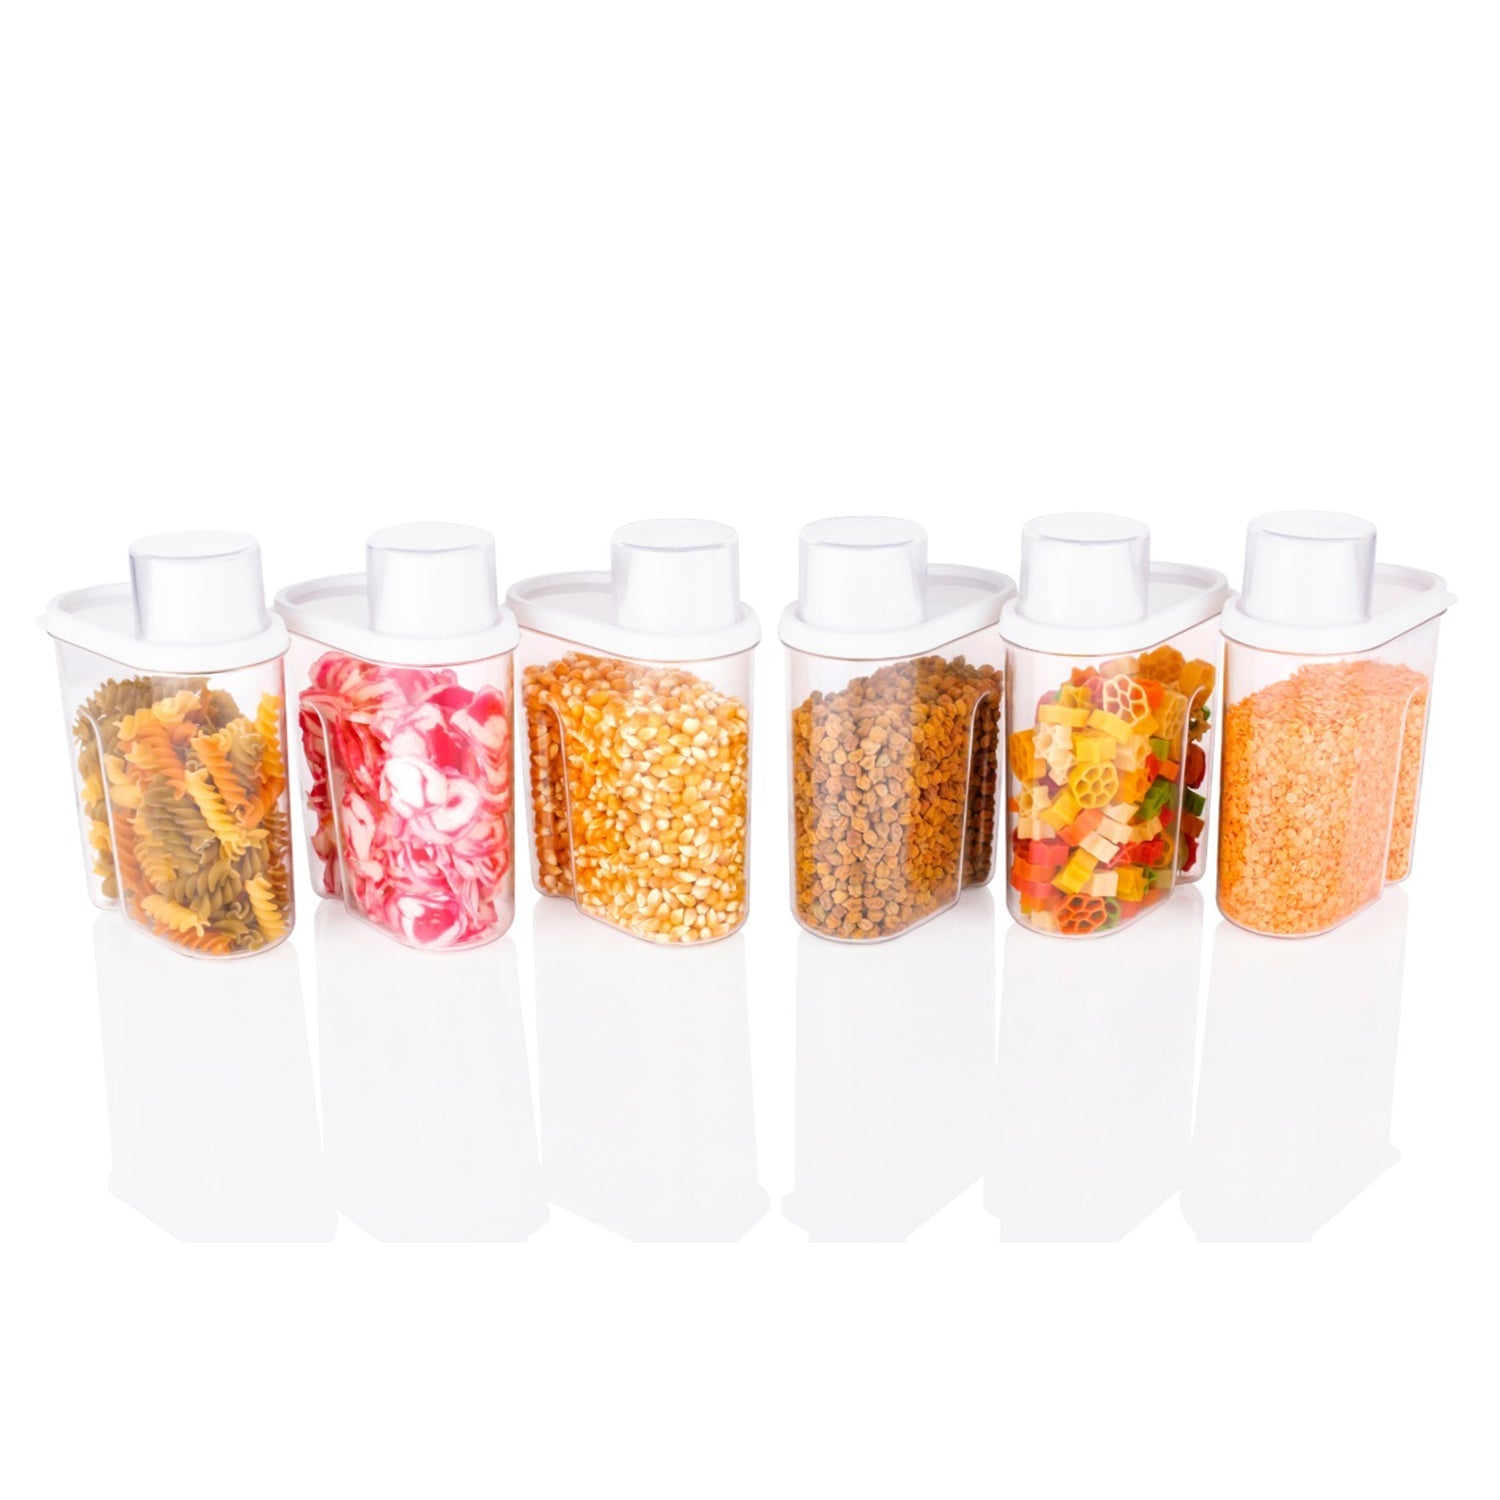 2760 3 Pc Cereal Dispenser 750 ML For Storing And Serving Of Cereal And All Stuffs. 